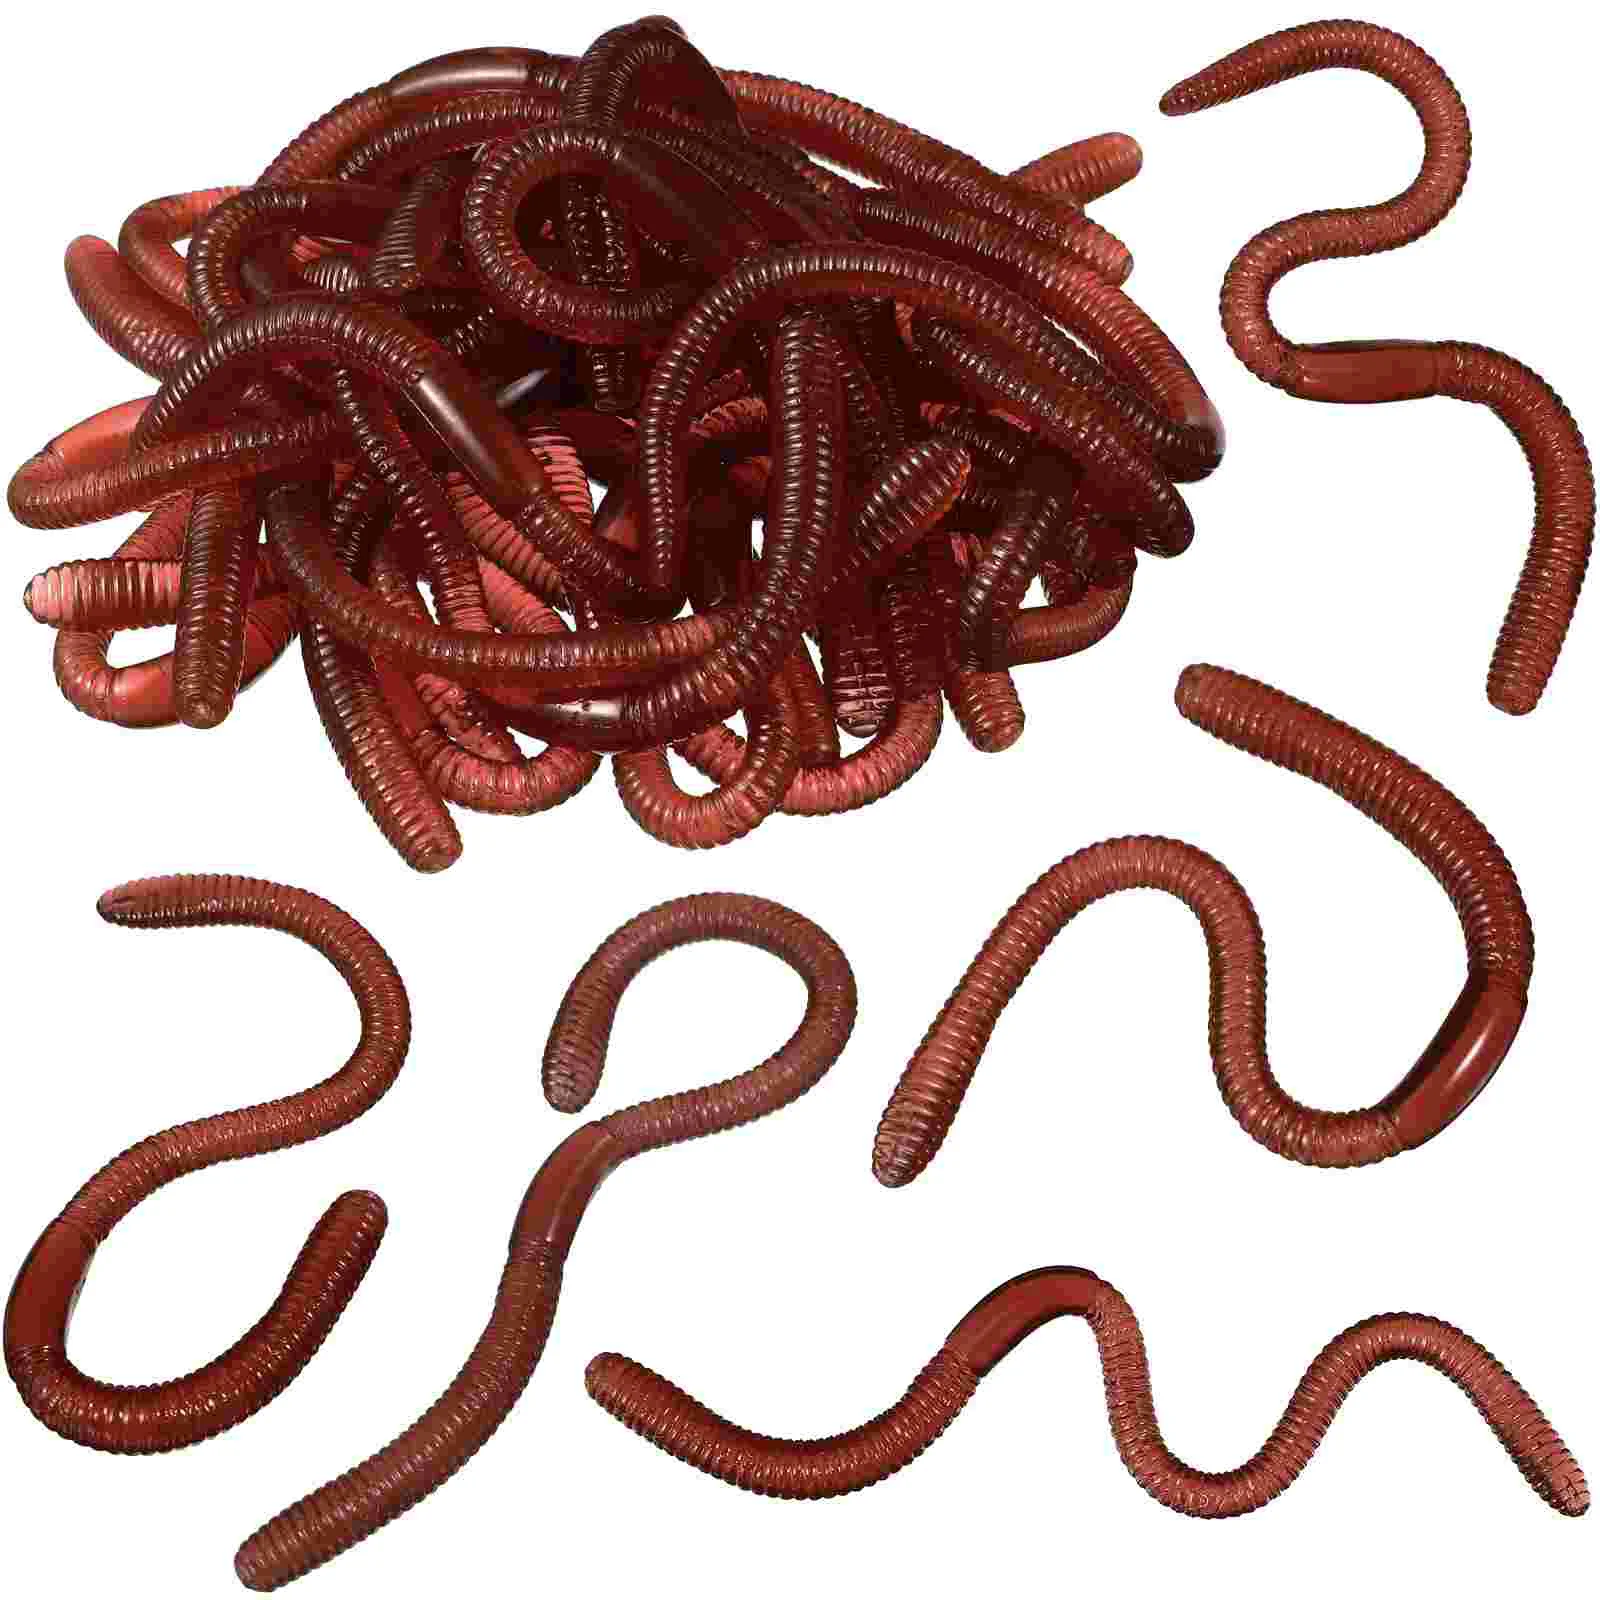 

25 Pcs Earthworm Tricky Toys Fake Earthworm Stretchy Earthworms Models Props for Halloween April Fool's Day Party